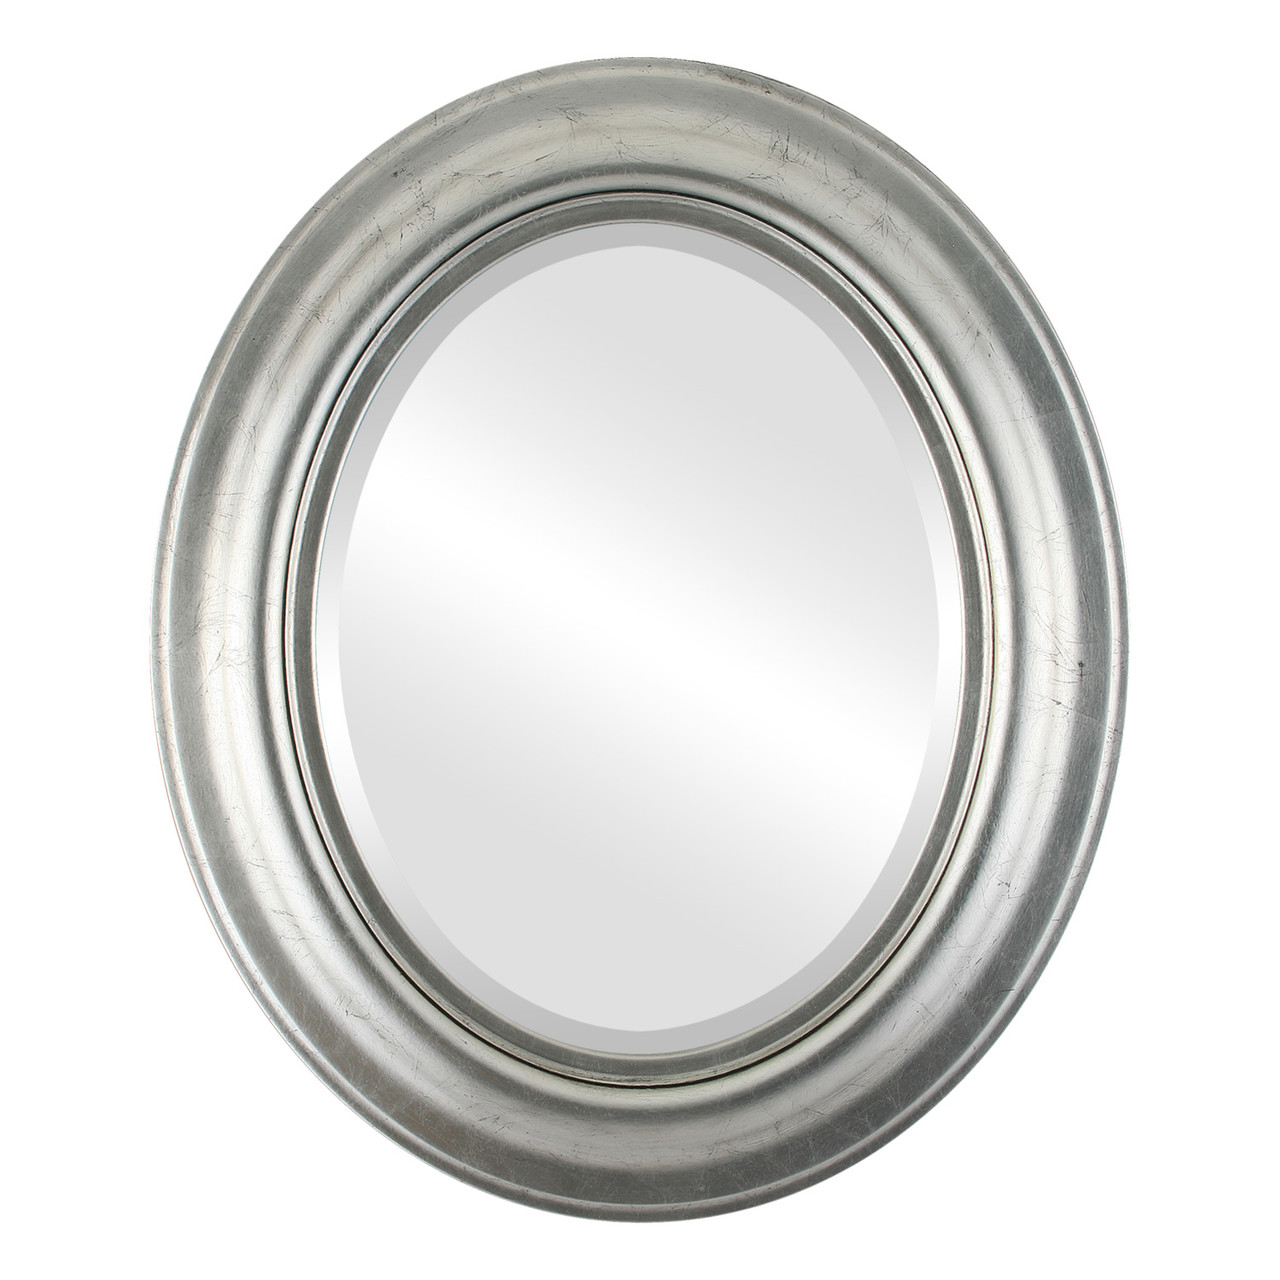 Contemporary Silver Oval Mirrors from $142 Free Shipping